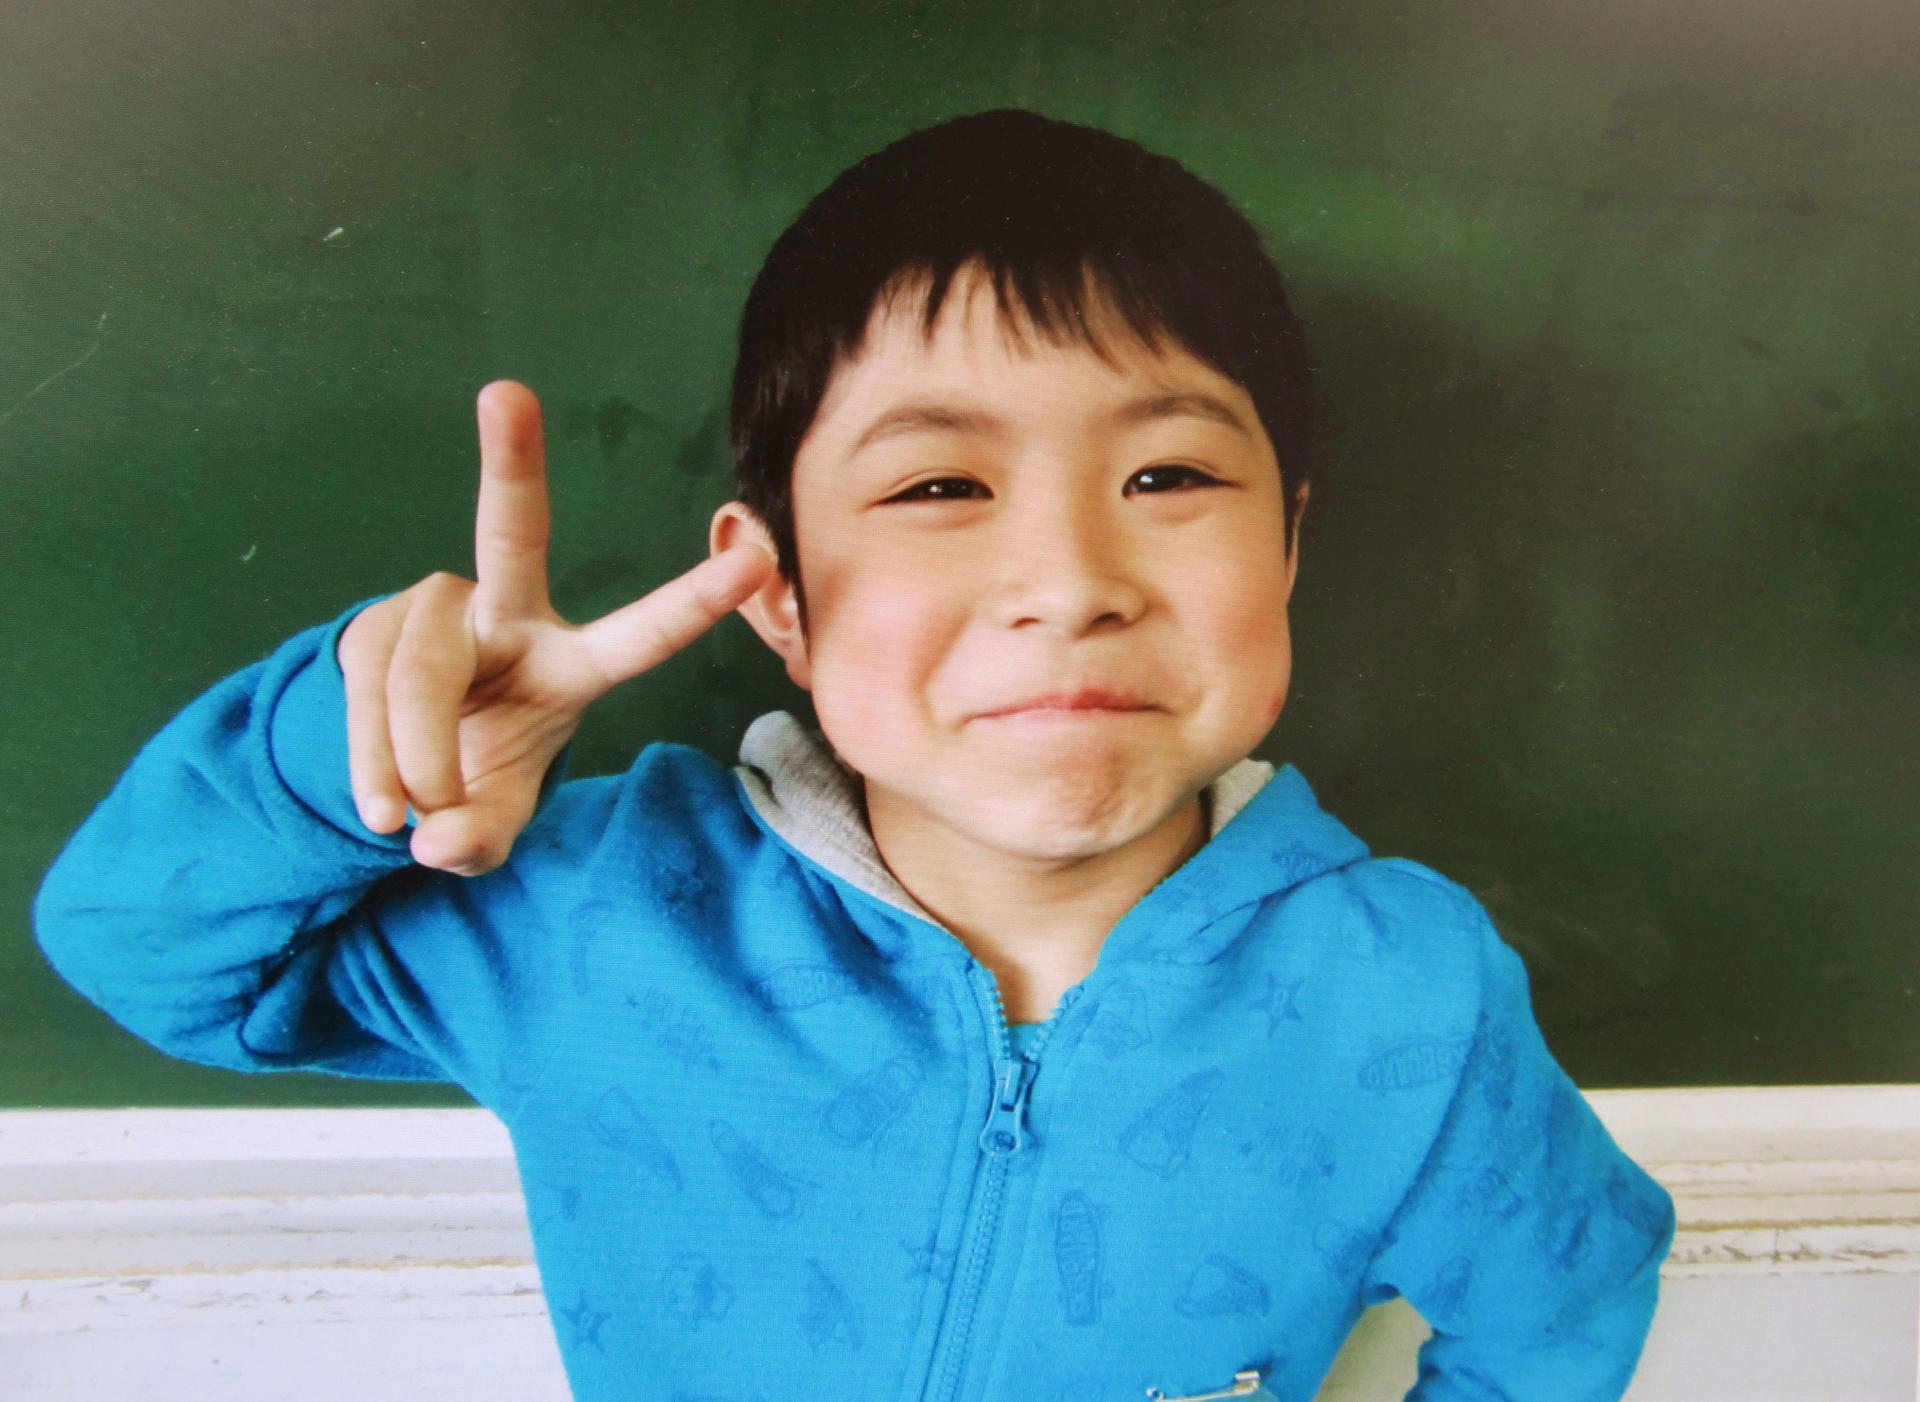 7-year-old Yamato Tanooka who went missing on May 28, 2016 after being left behind by his parents, was found alive.